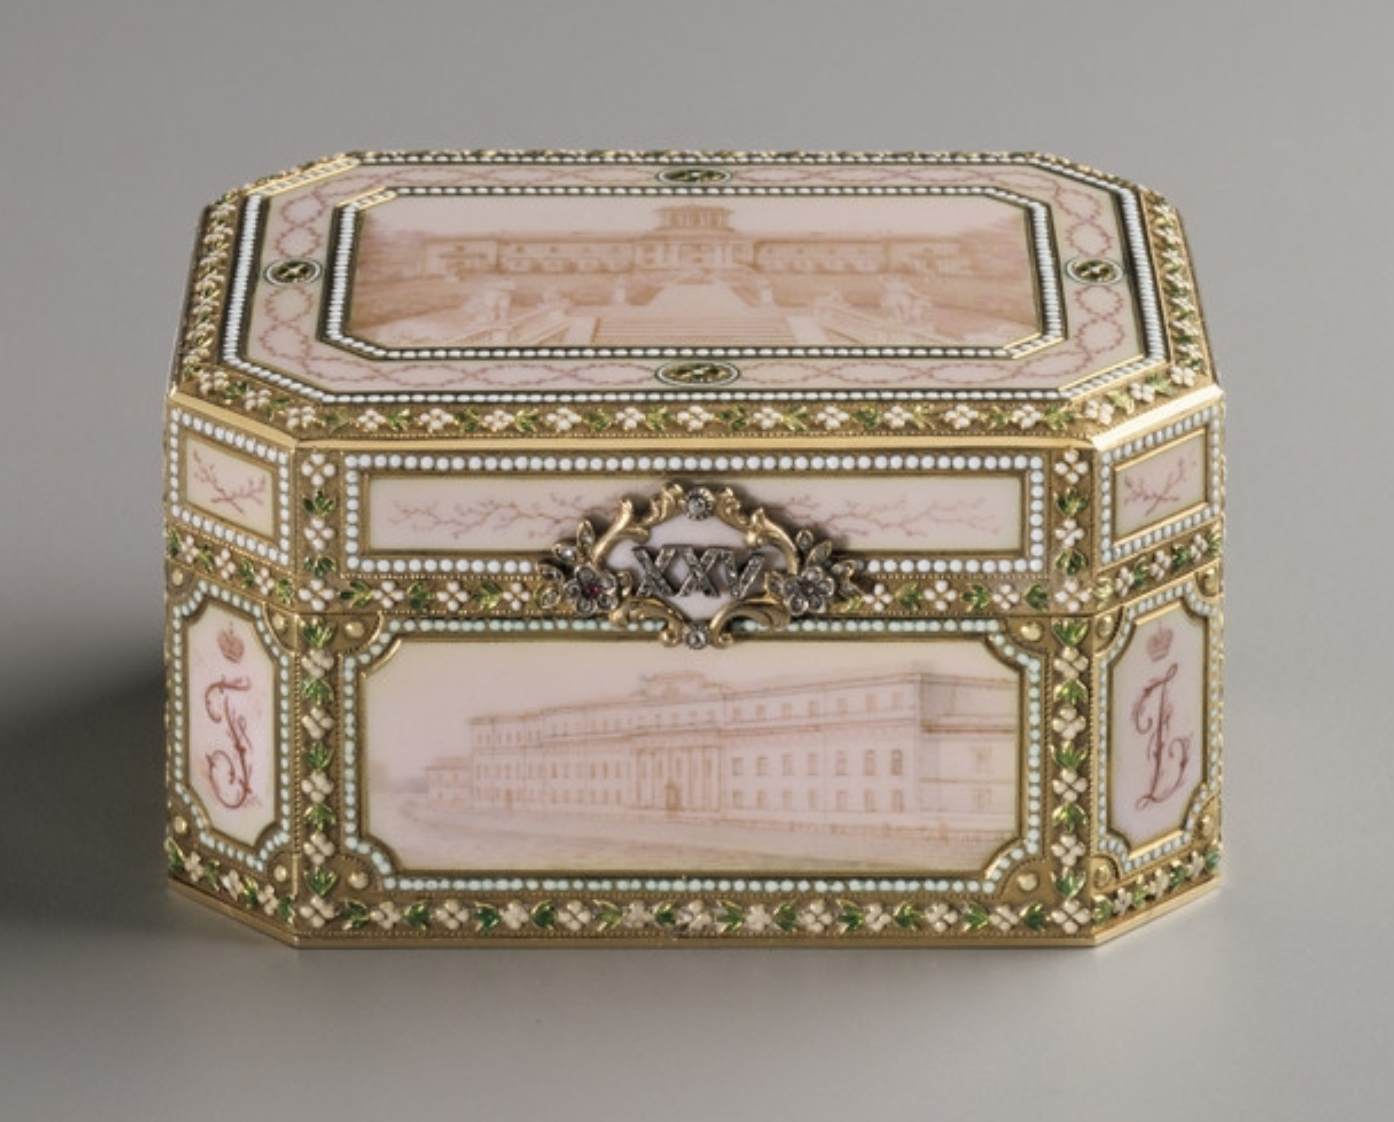 Faberge Jewelry Box at Hillwood Museum